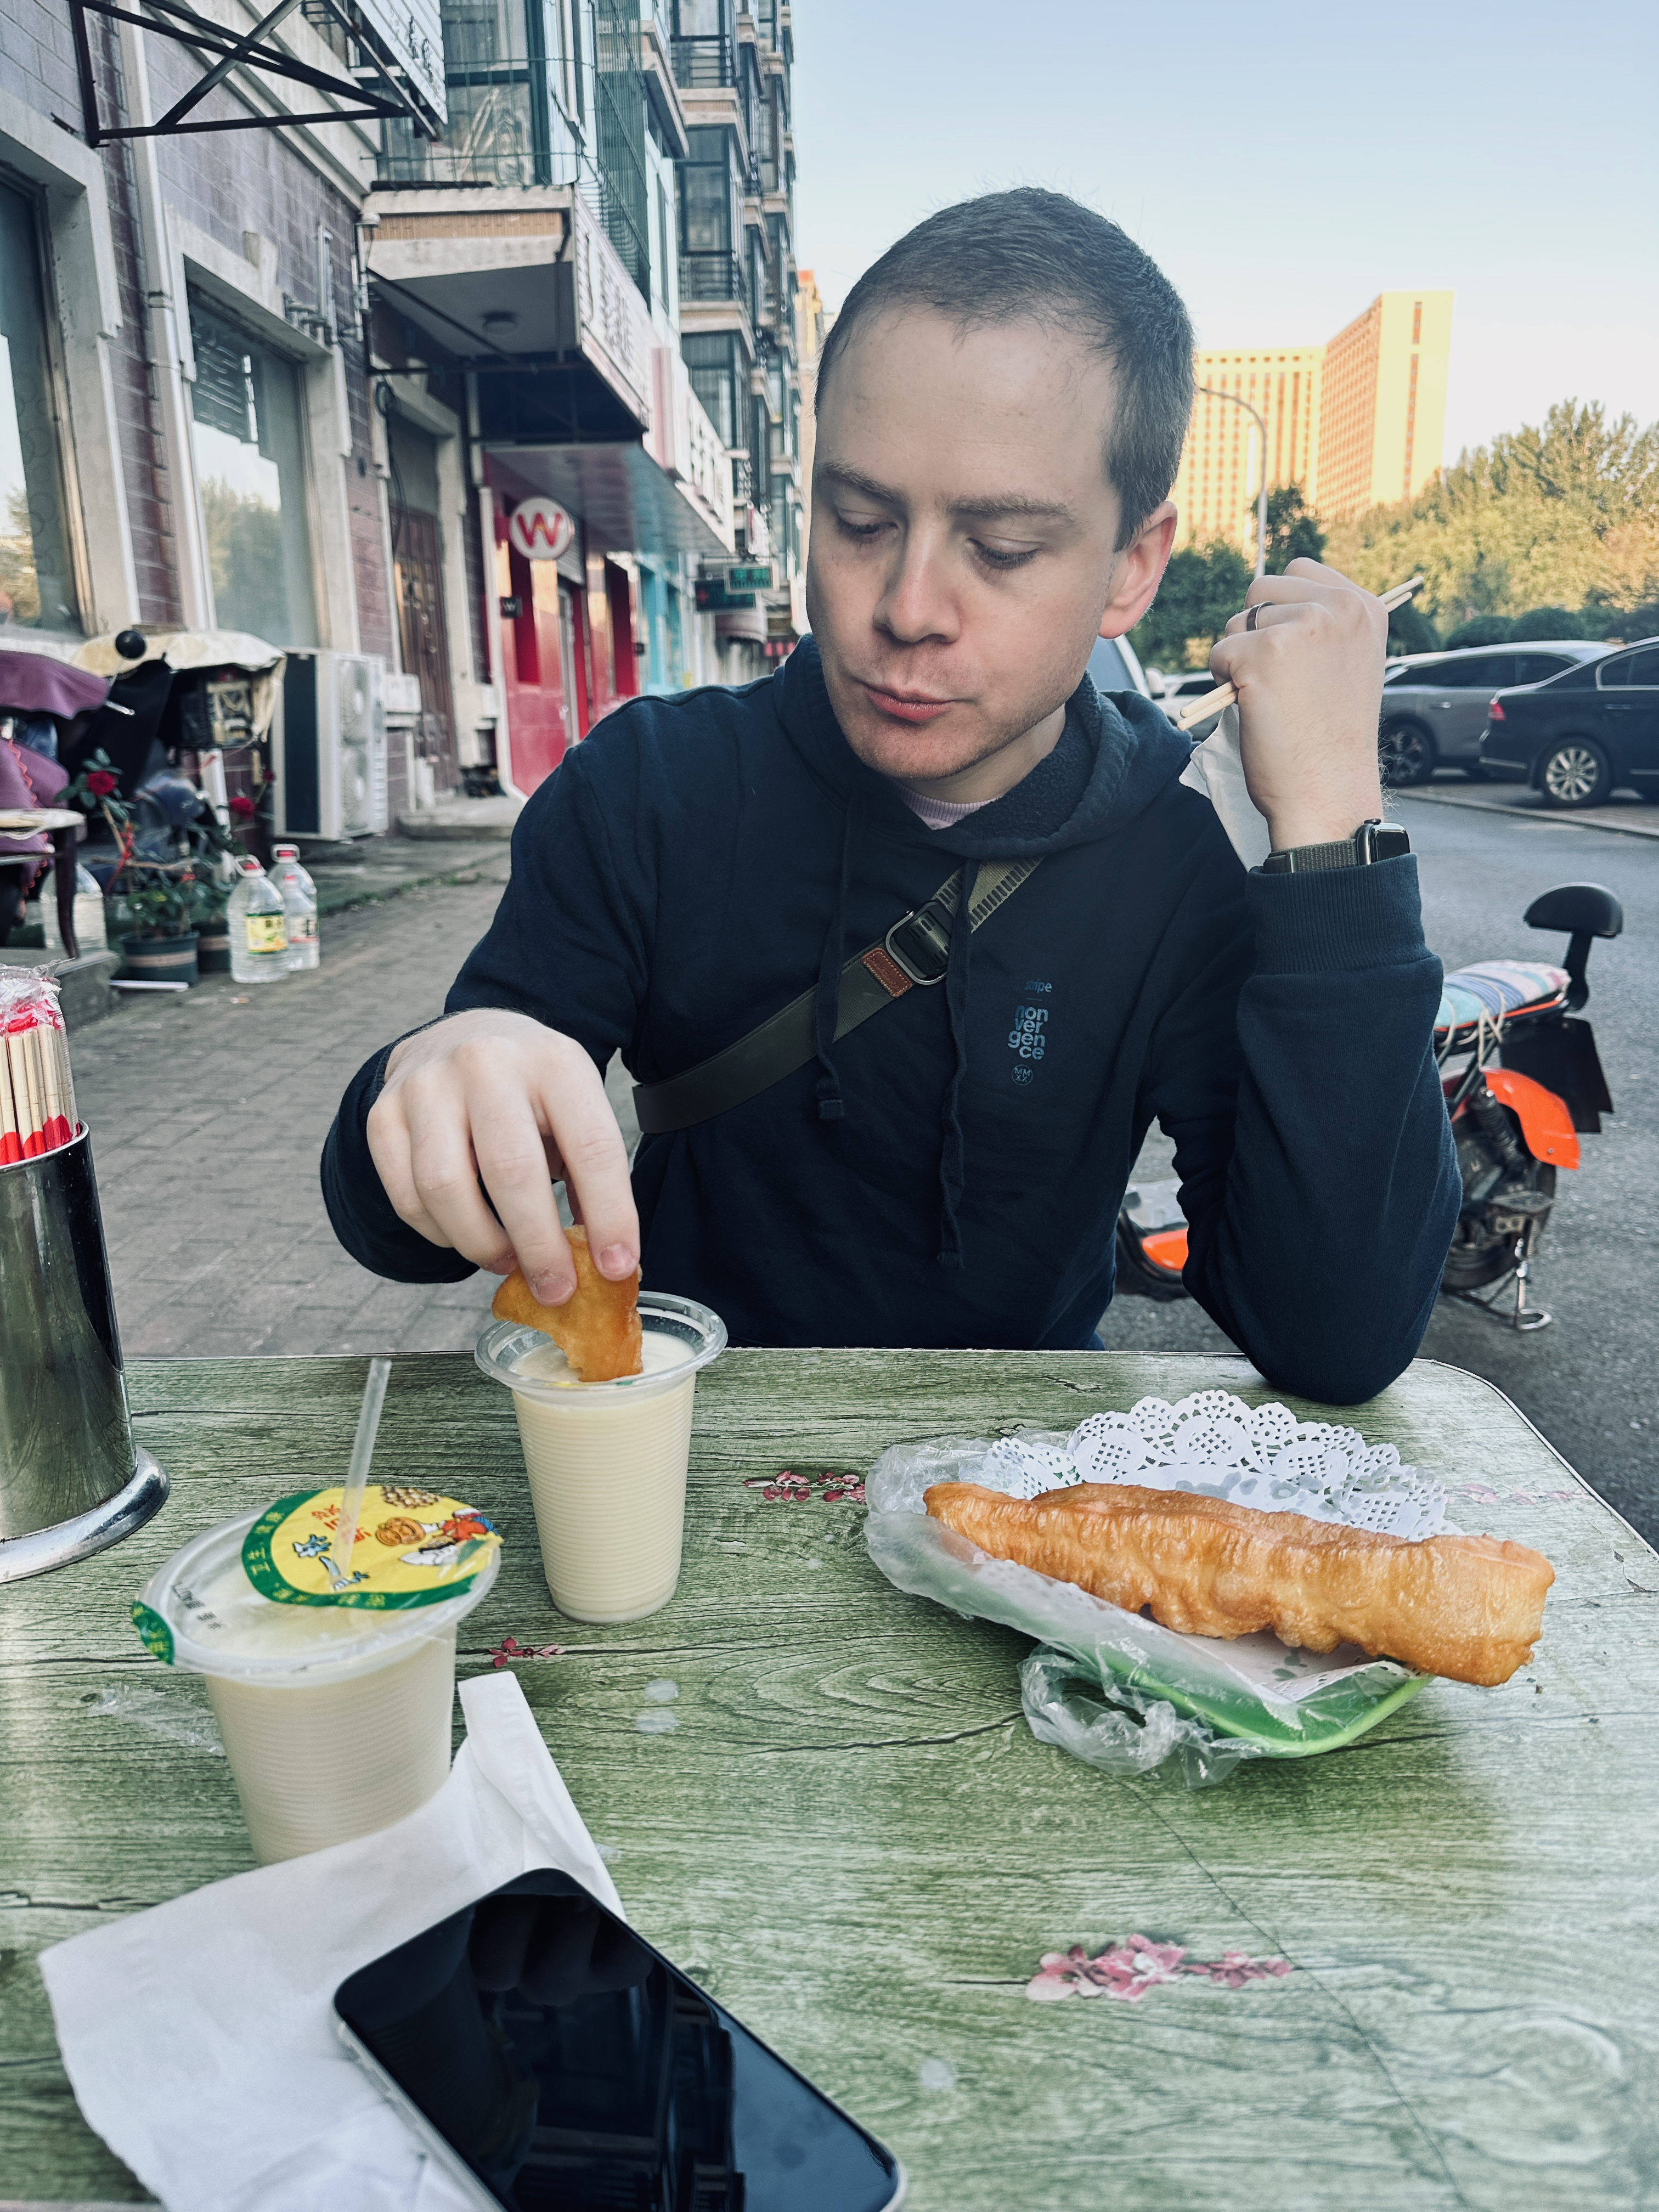 A photo of me, a white man, dipping a long donut-looking item in a cup of soy milk. We are sitting at a table on the street and the sun is rising.